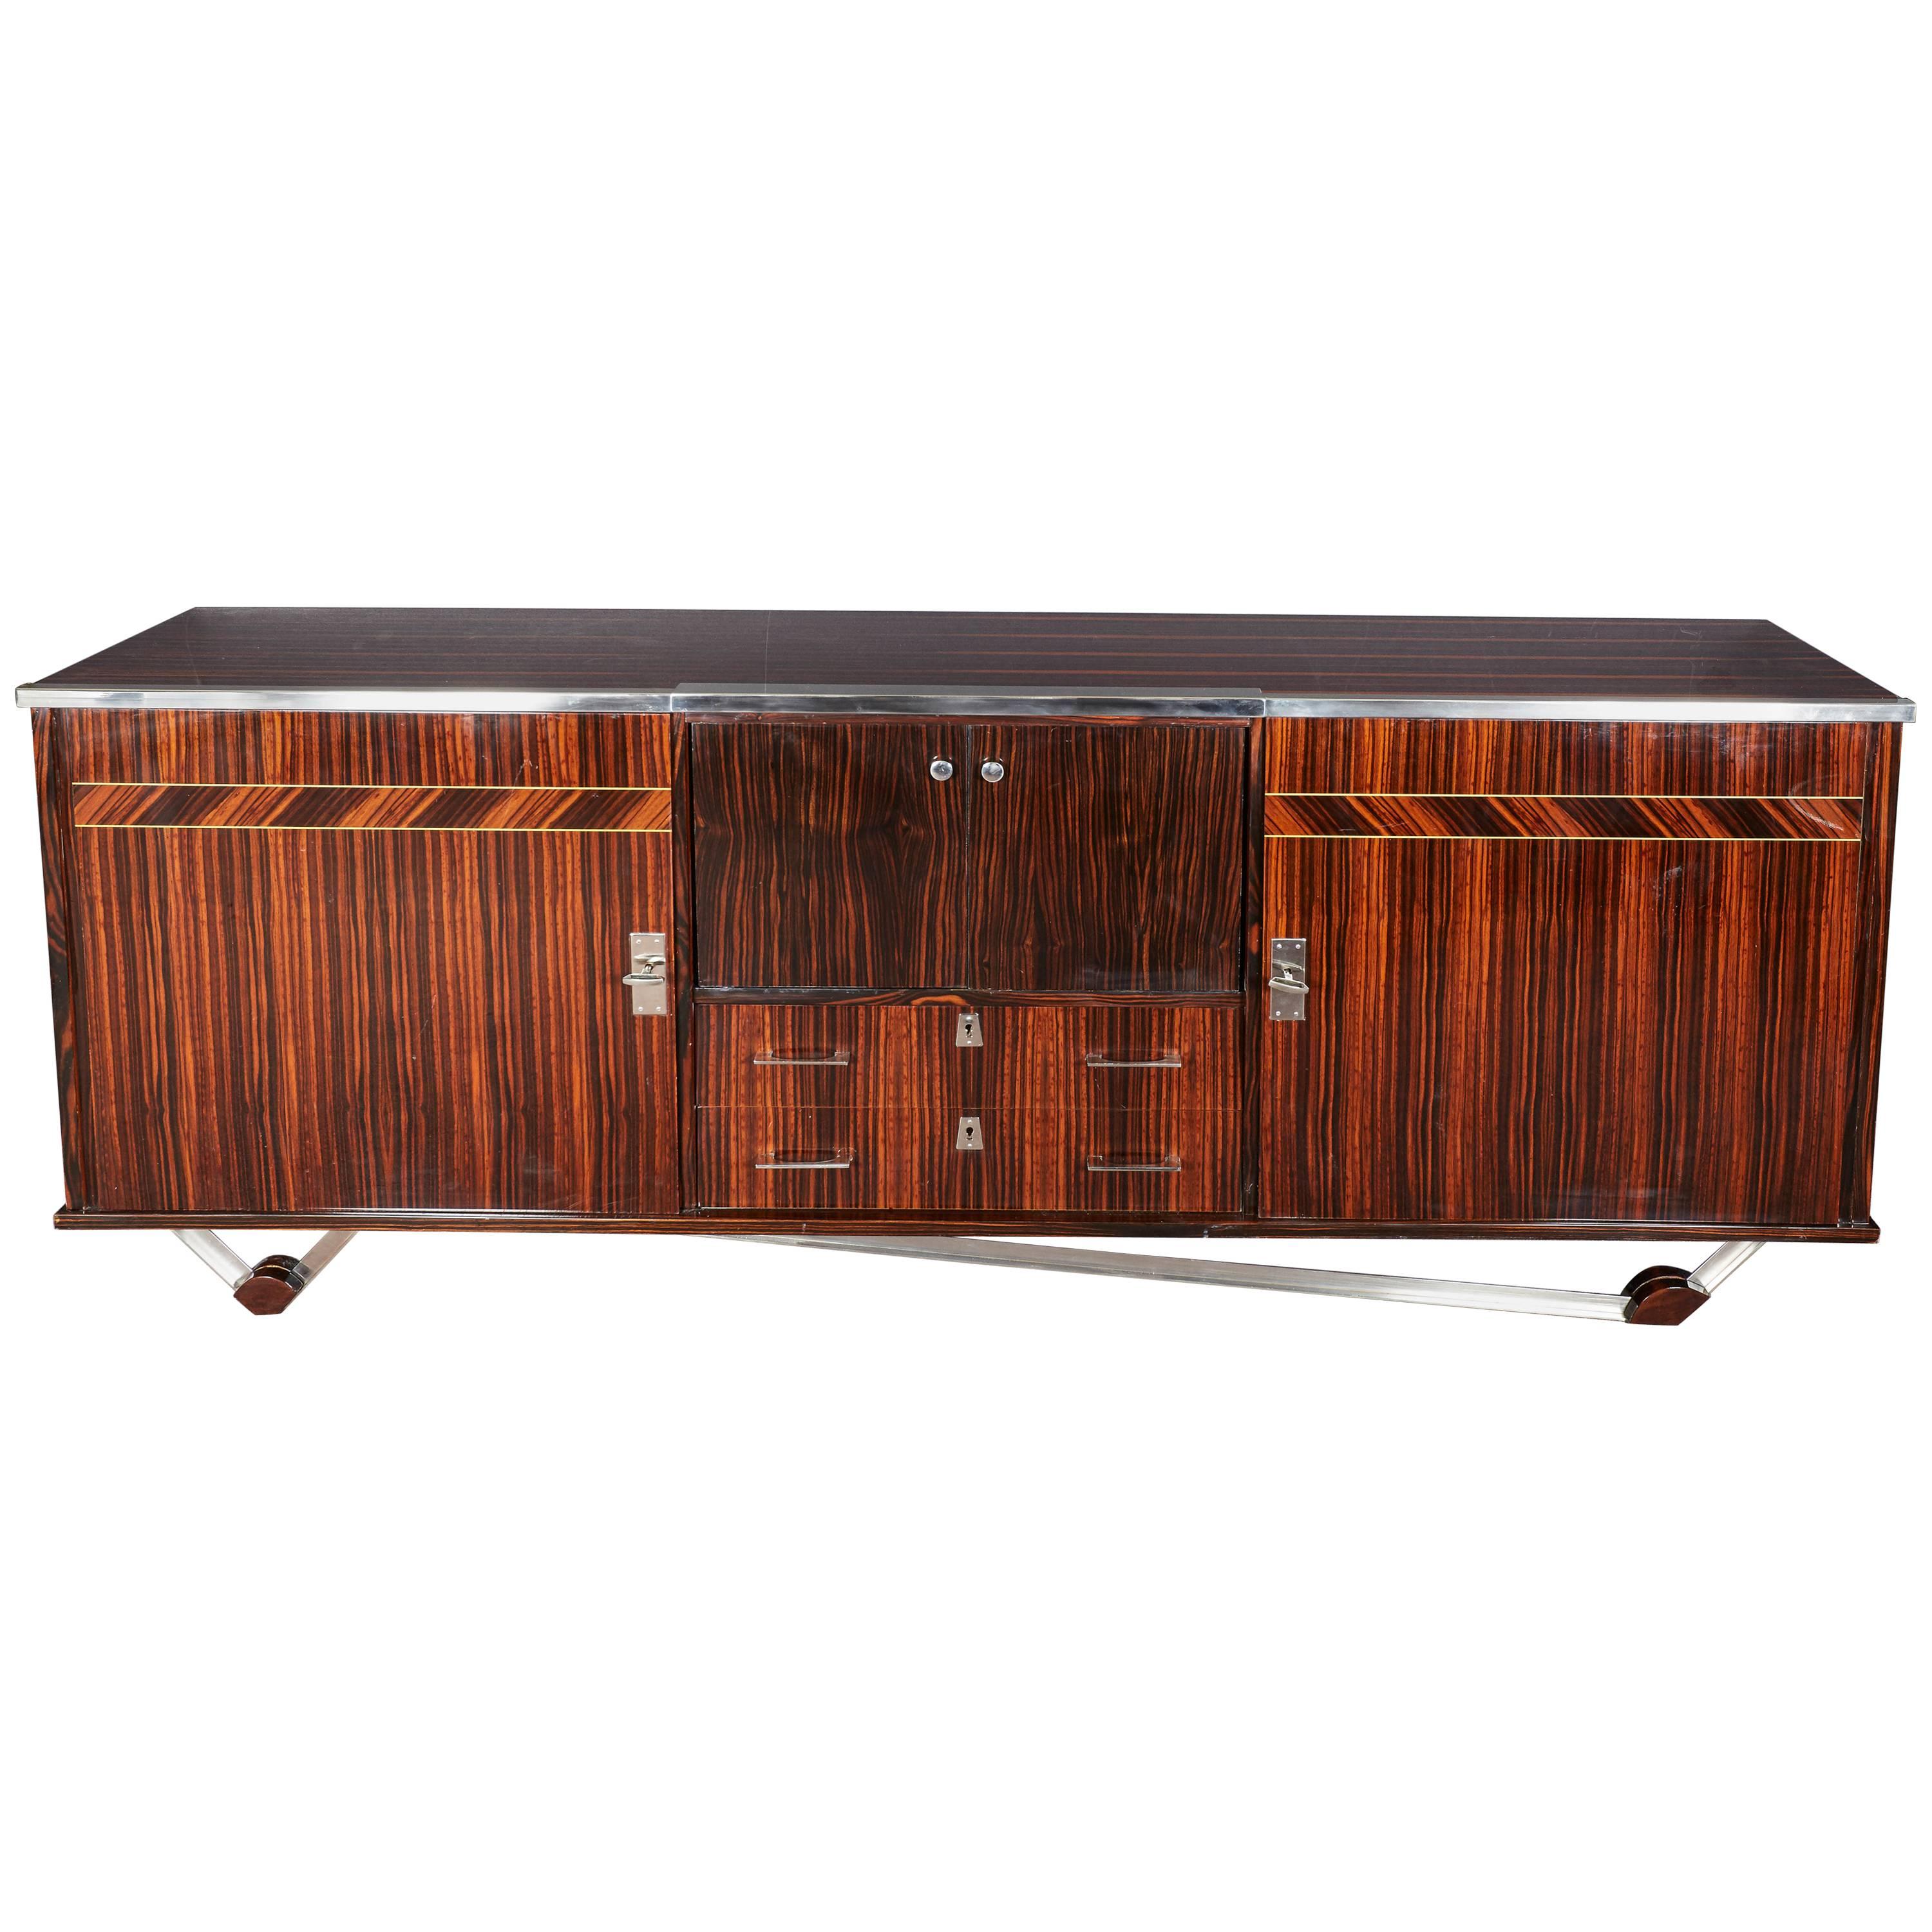 Original French Modern Macassar Ebony Credenza with Nickeled Bronze Mounts For Sale